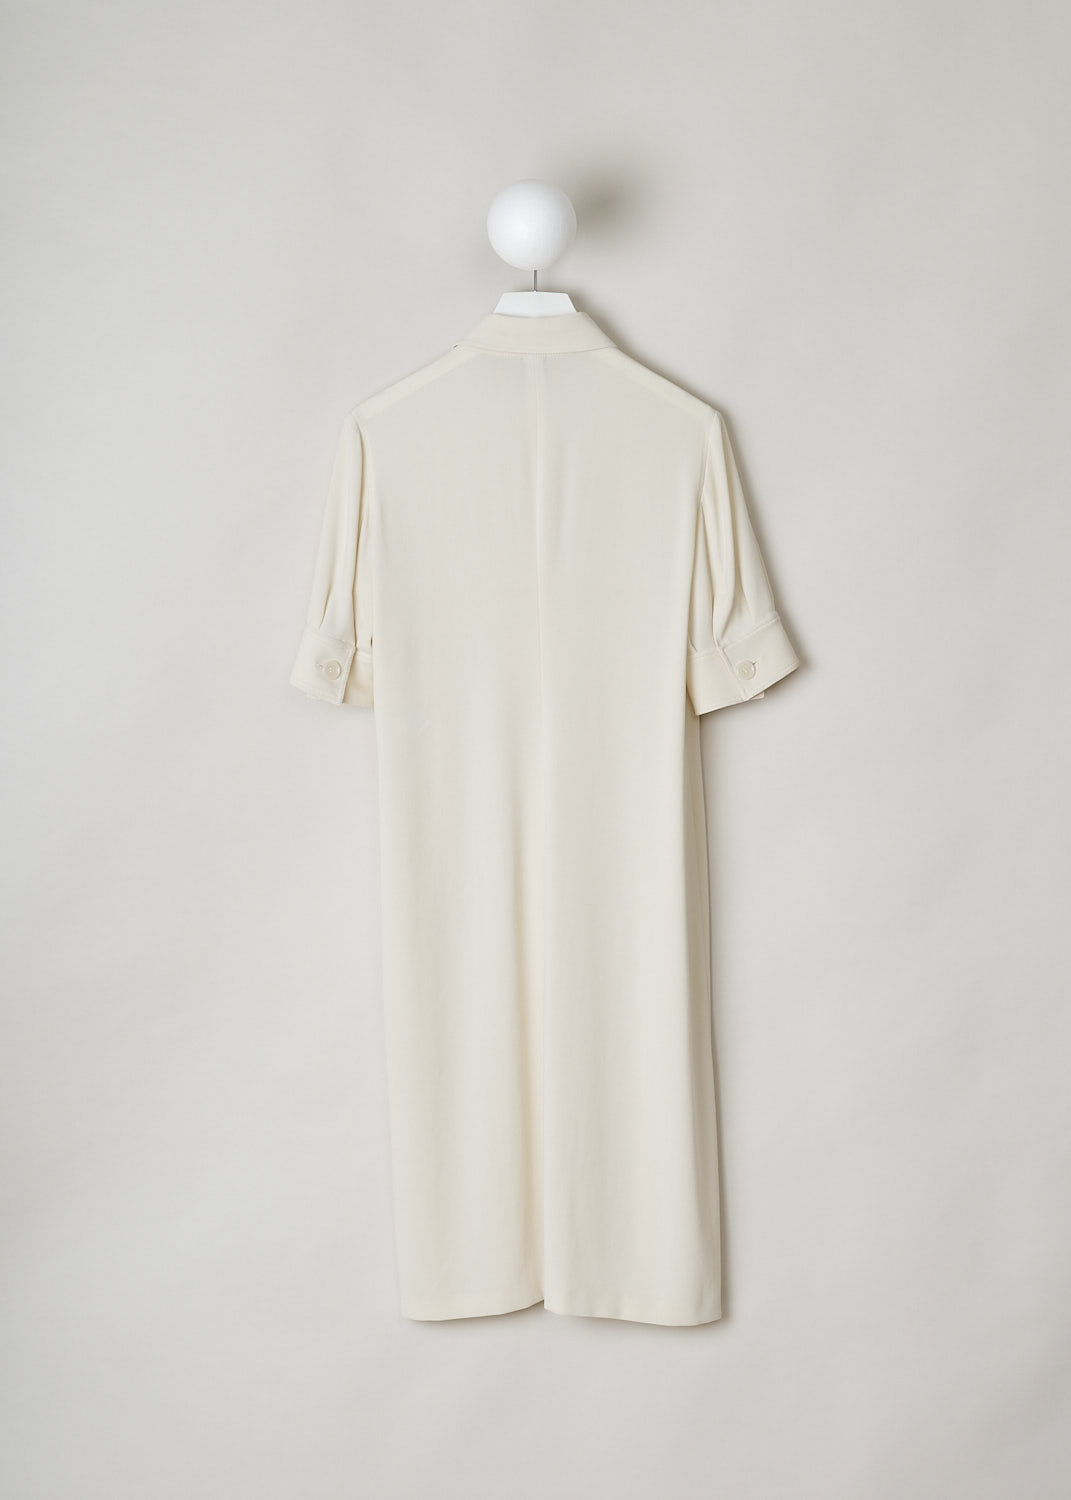 ASPESI, OFF-WHITE MIDI SHIRT DRESS, 2901_2088_10073, White, Beige, Back, This off-white midi shirt dress has a classic collar and a front button closure. The dress has short pleated sleeves with buttoned cuffs. The dress has a straight hemline. In the back, the dress has a centre seam. 
